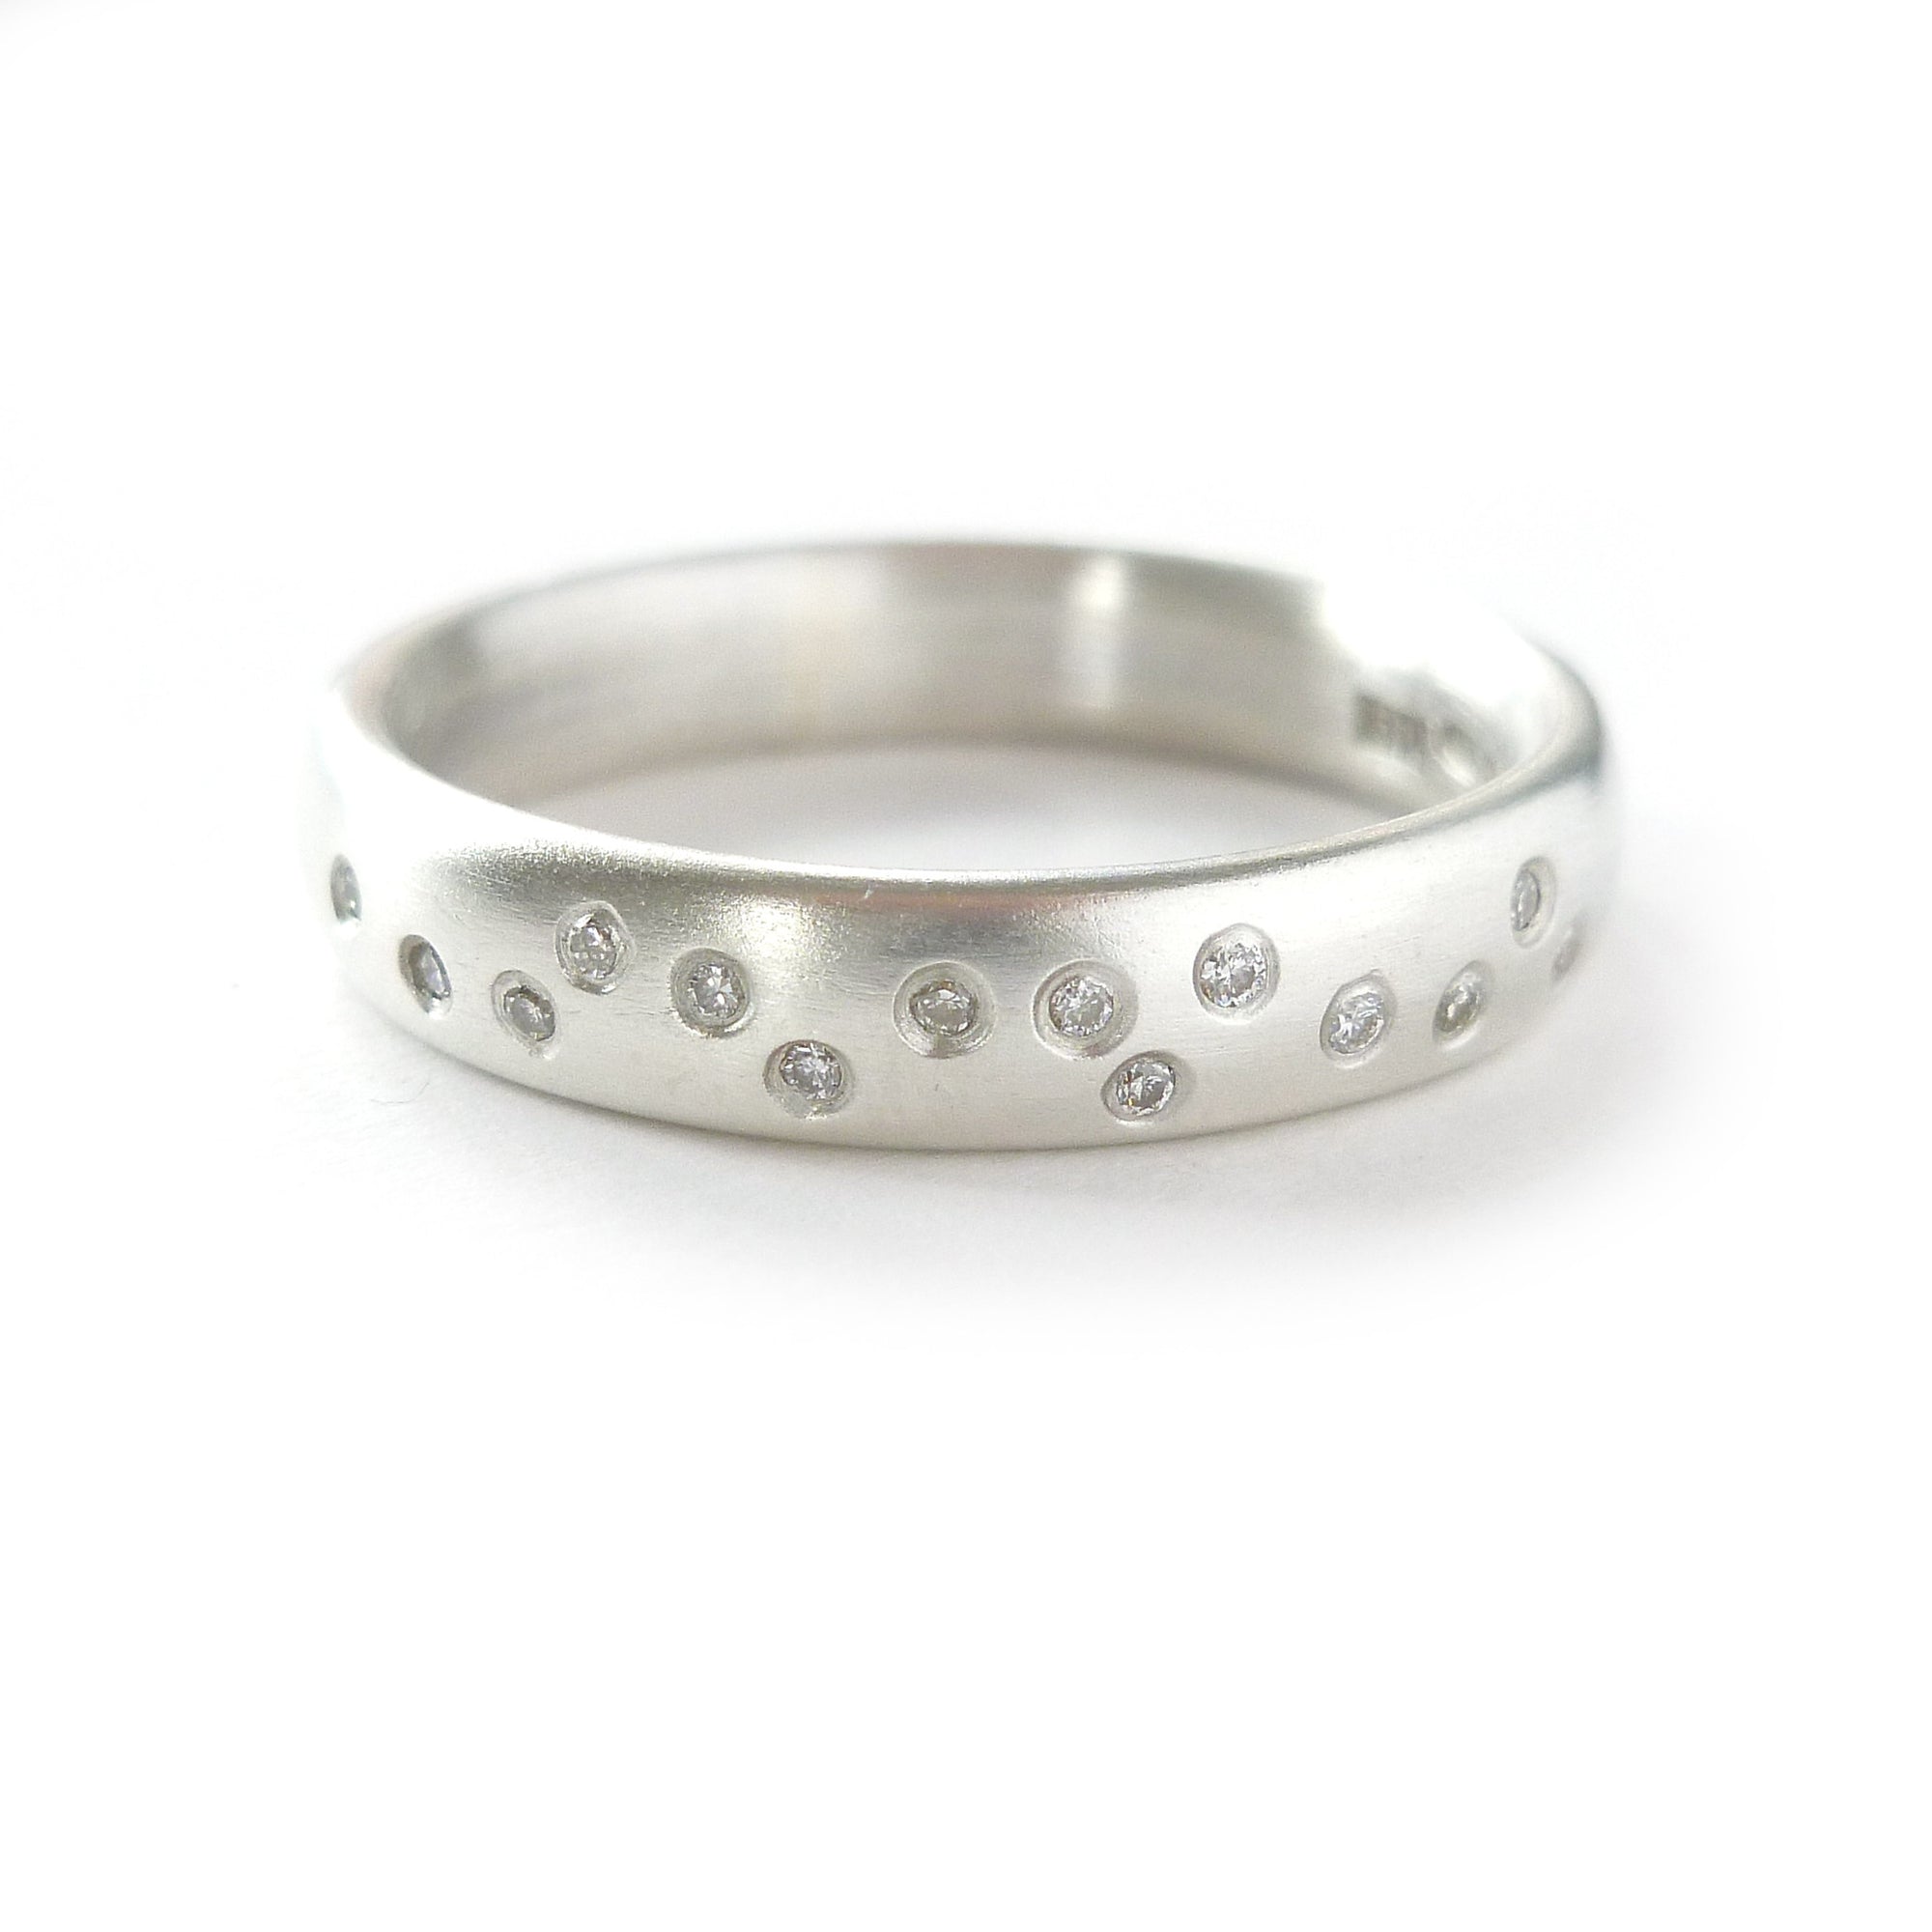 Unusual, unique, bespoke and modern silver and 12 diamond dress ring, wedding ring, eternity ring, engagement brushed finish. Handmade by Sue Lane Jewellery UK